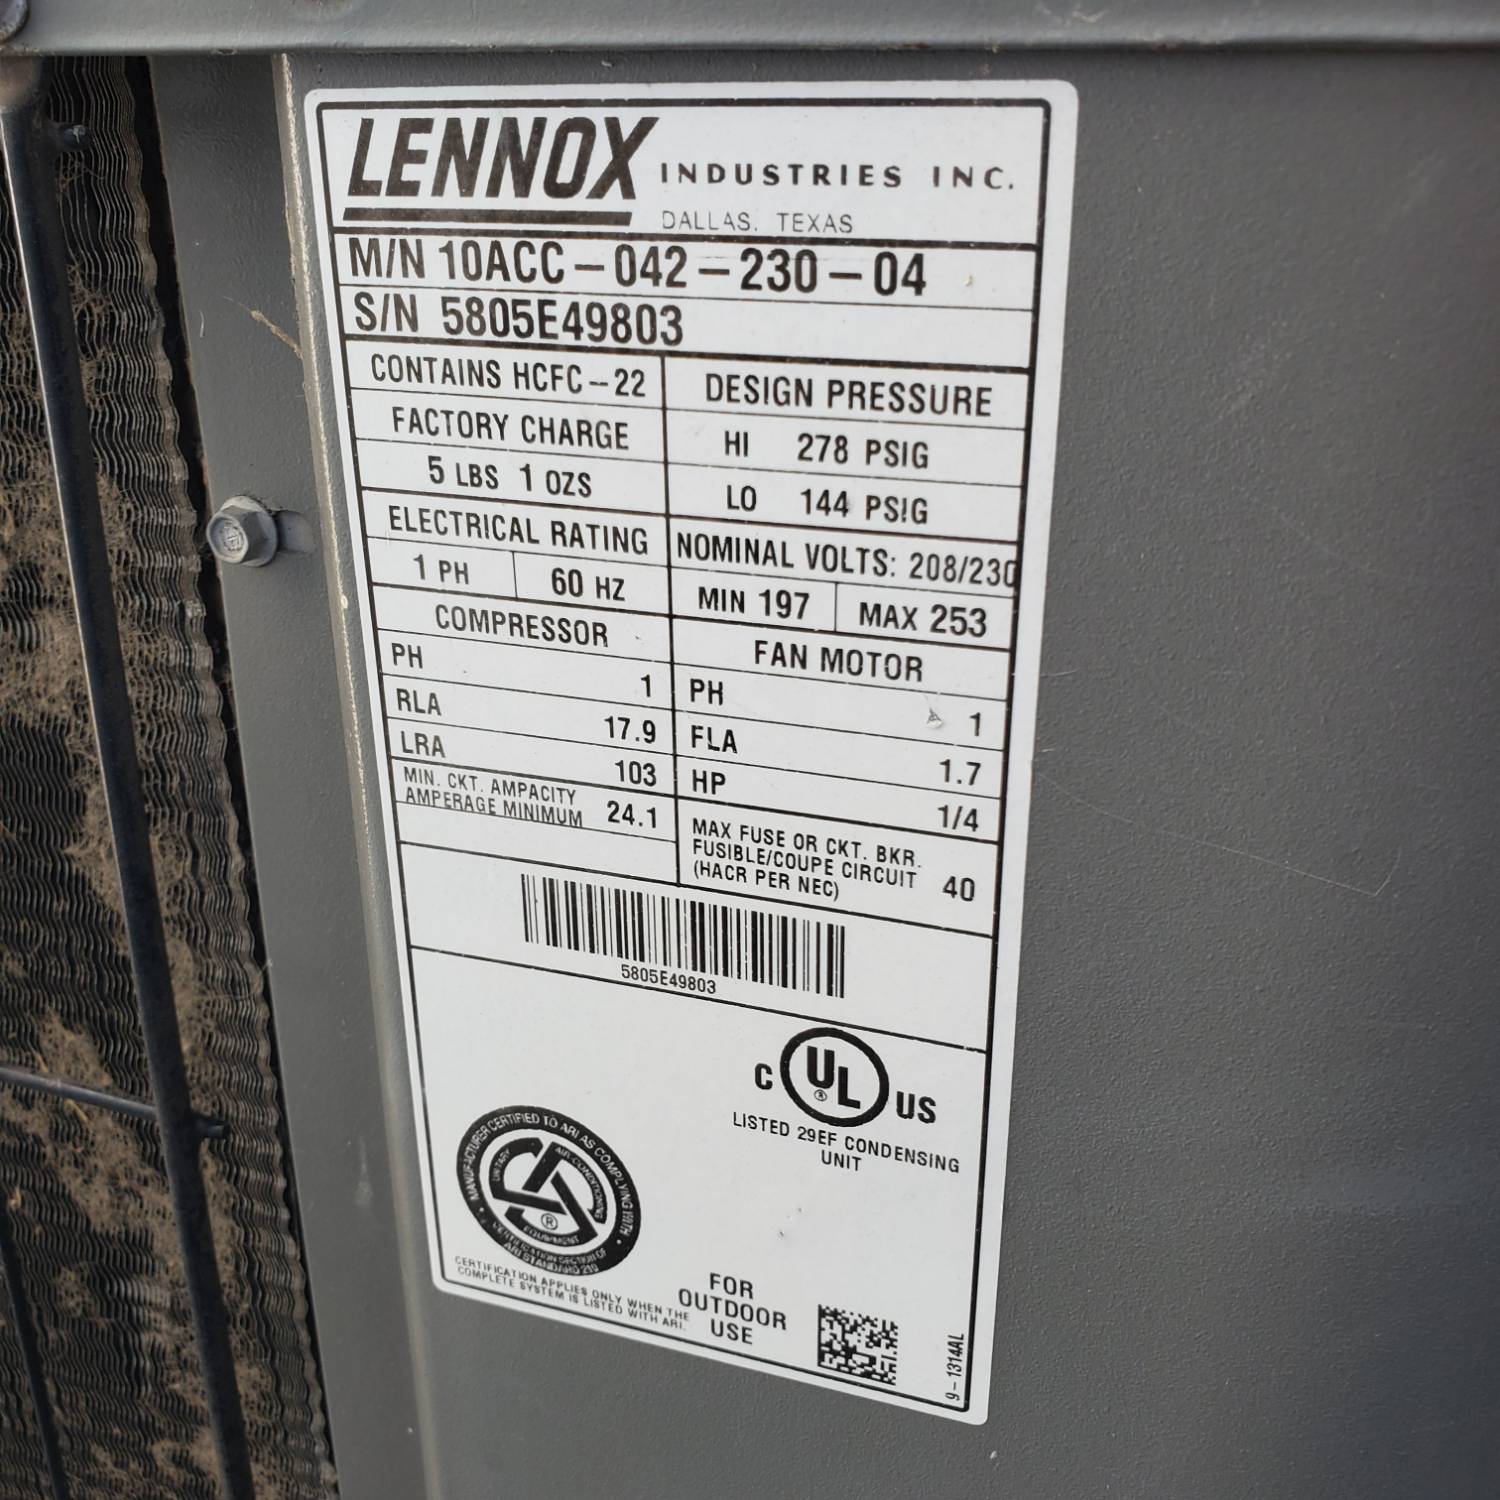 age of water heater from serial number